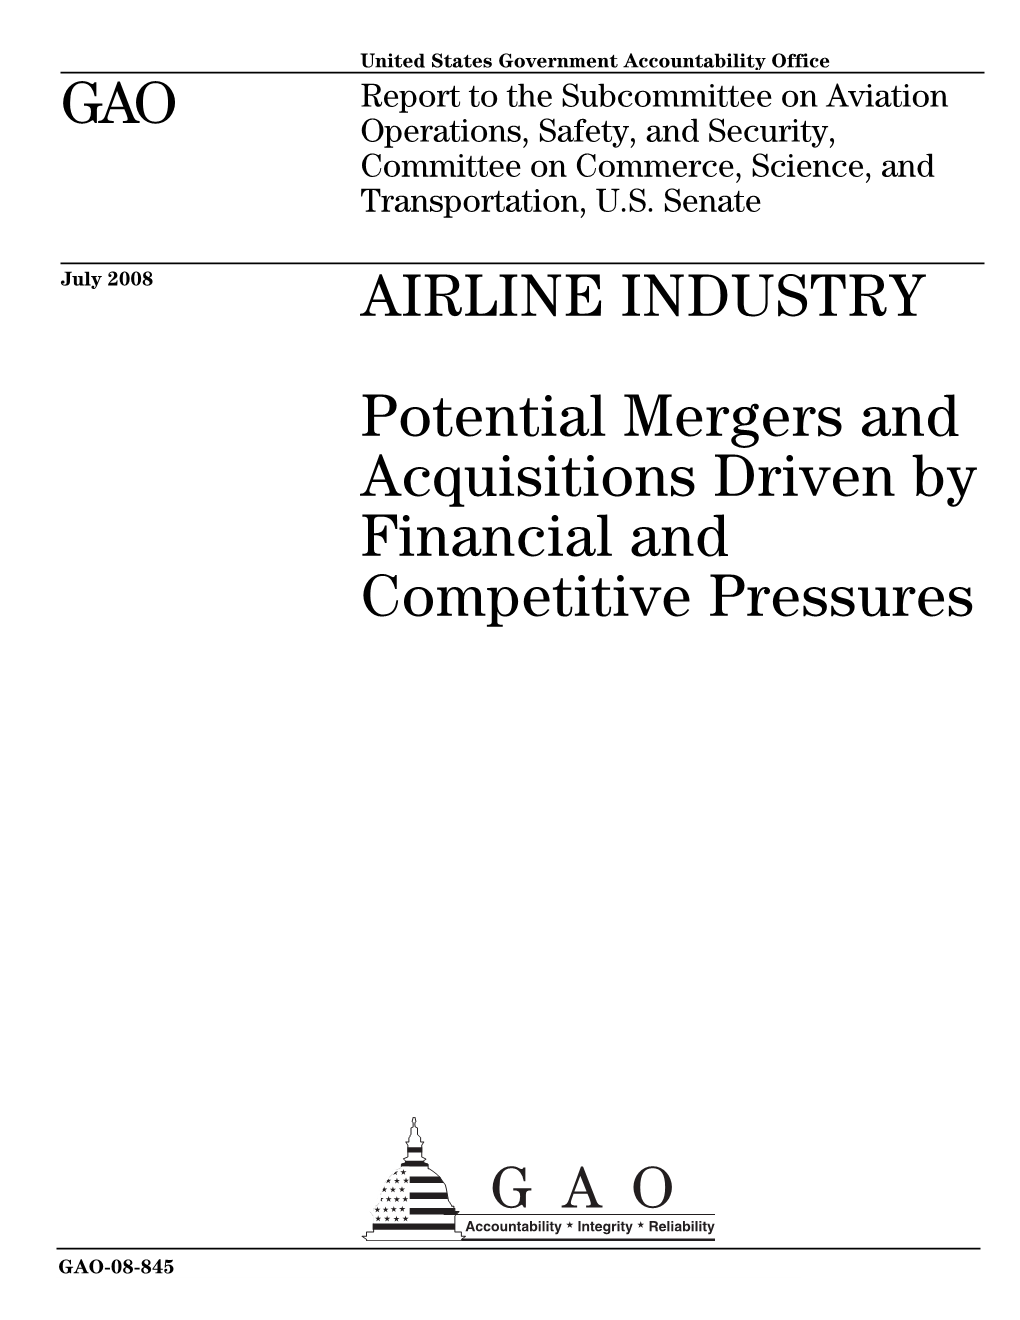 GAO-08-845 Airline Industry: Potential Mergers and Acquisitions Driven